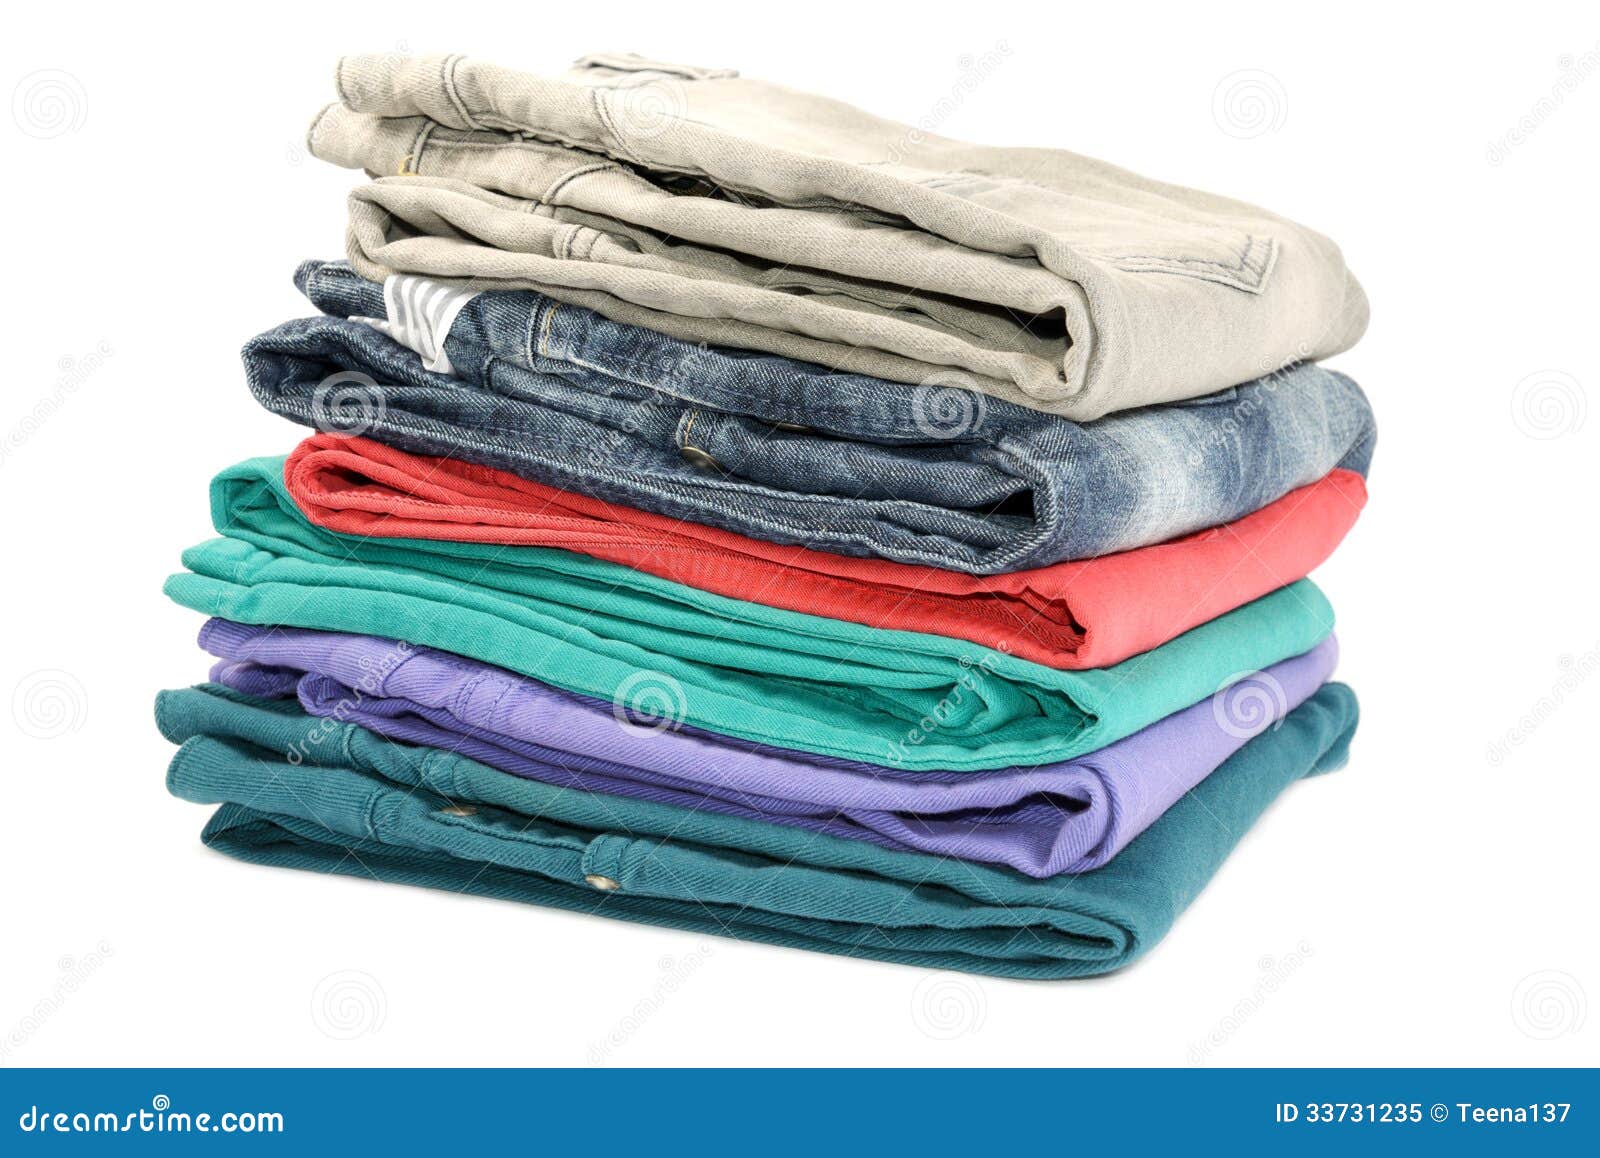 Colorful jeans stock image. Image of stack, pants, fashion - 33731235